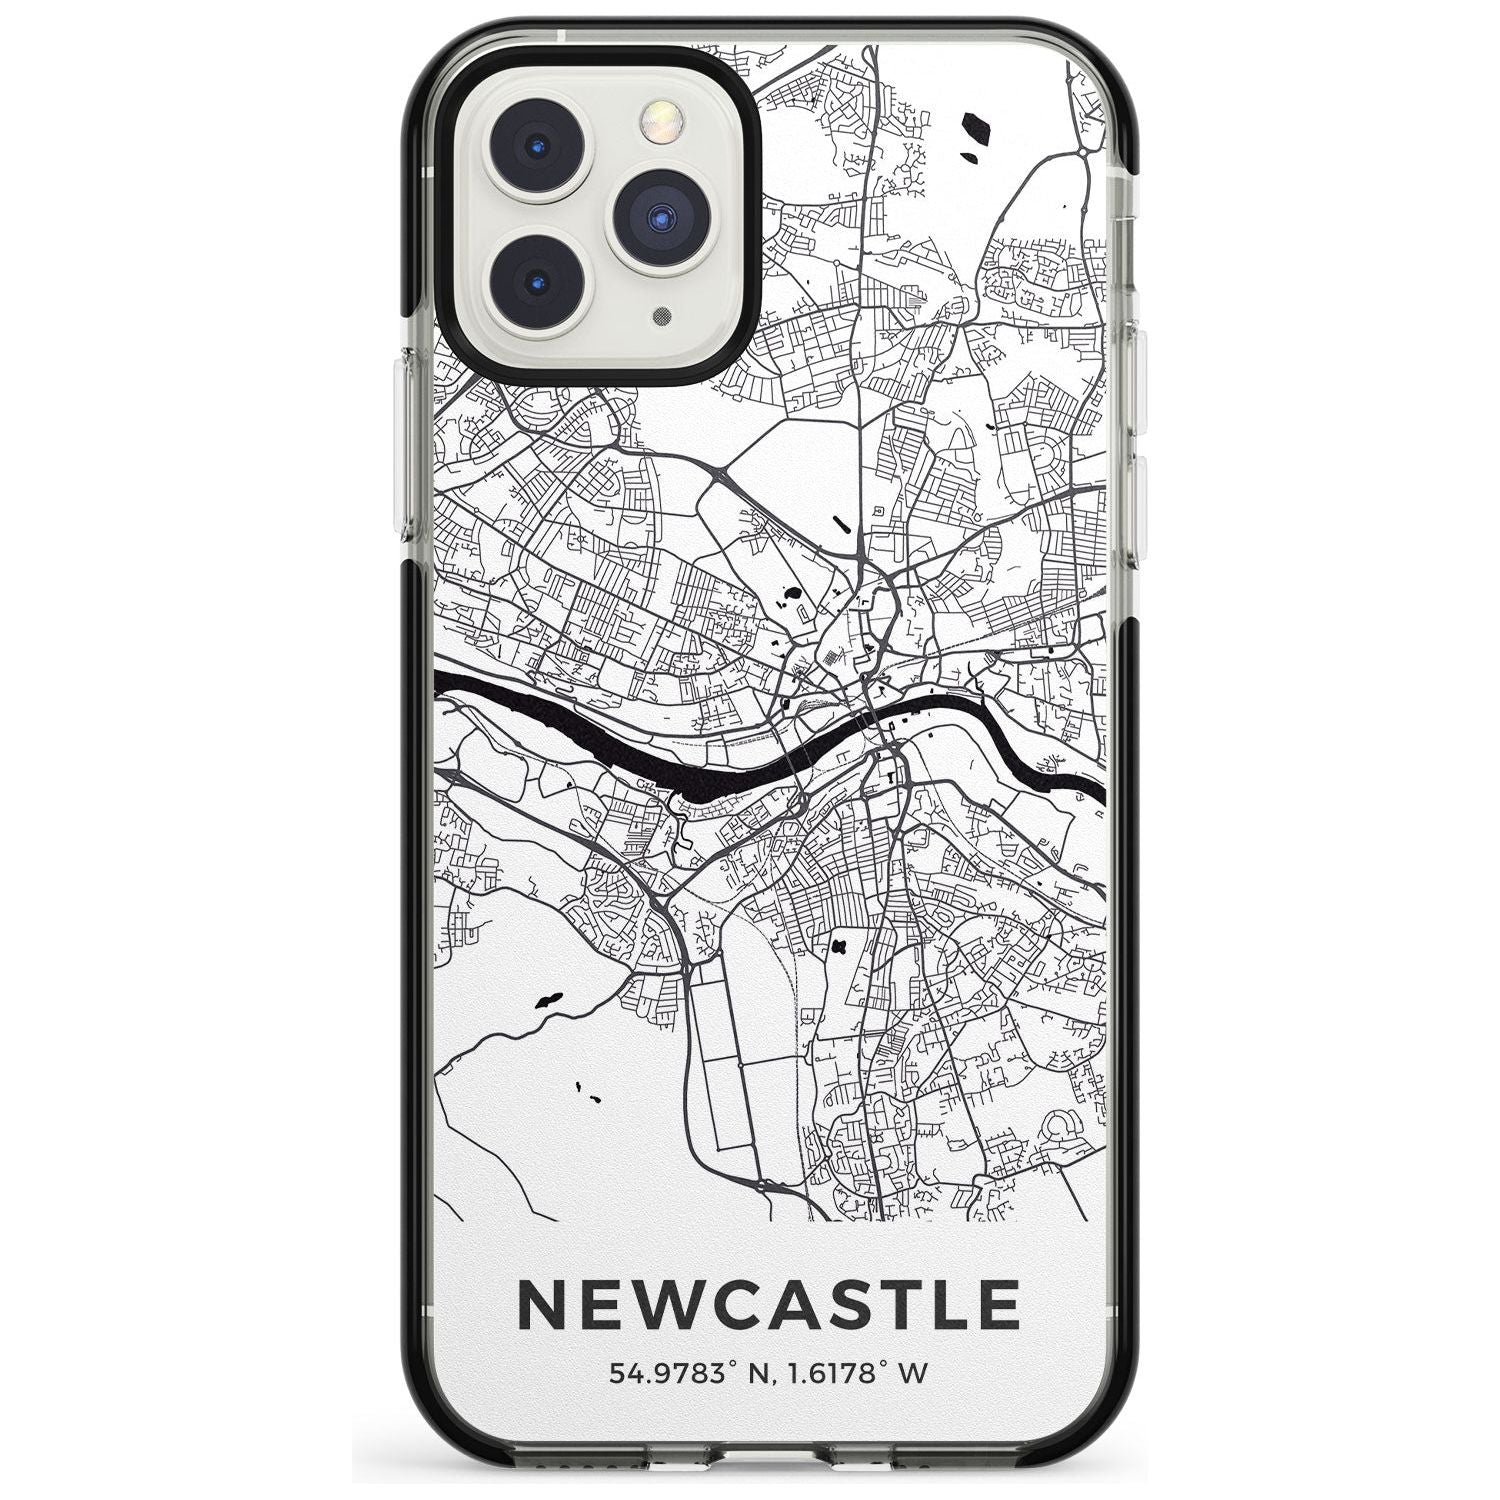 Map of Newcastle, England Black Impact Phone Case for iPhone 11 Pro Max